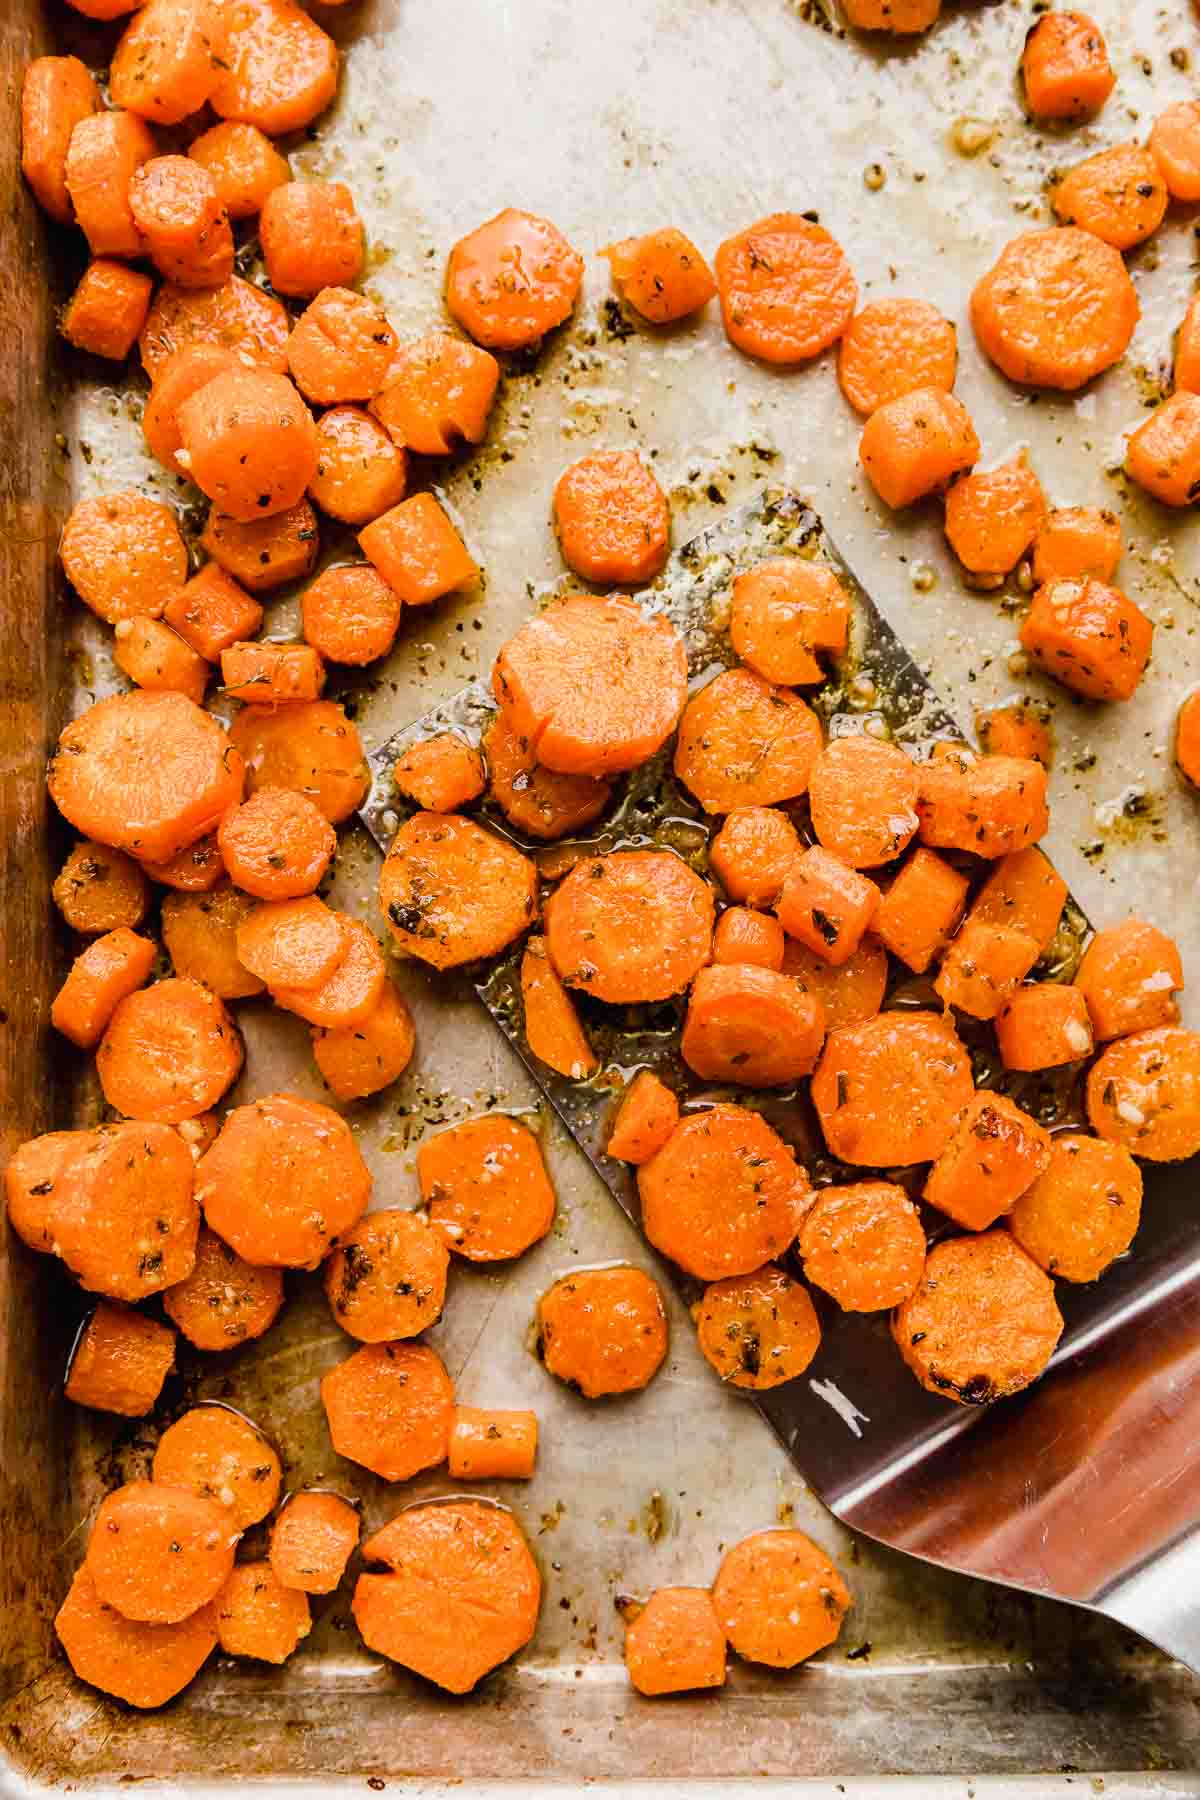 Garlic parmesan roasted carrots sliced into coins, on a baking sheet.